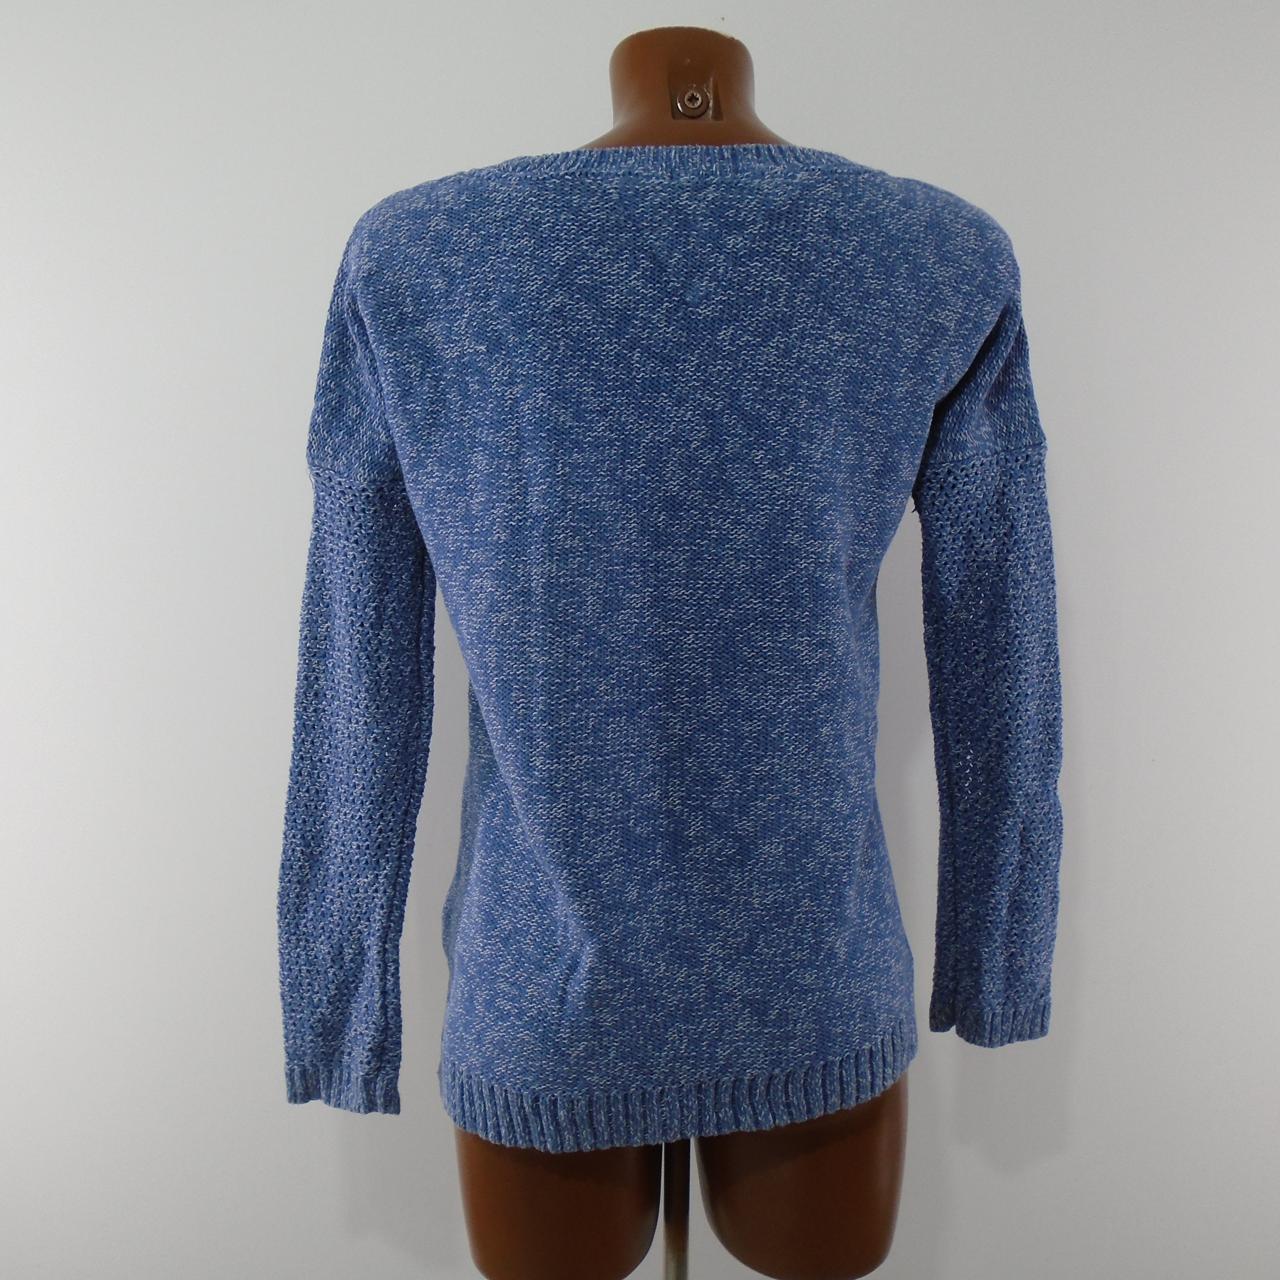 Women's Sweater Tommy Hilfiger. Blue. M. Used. Good